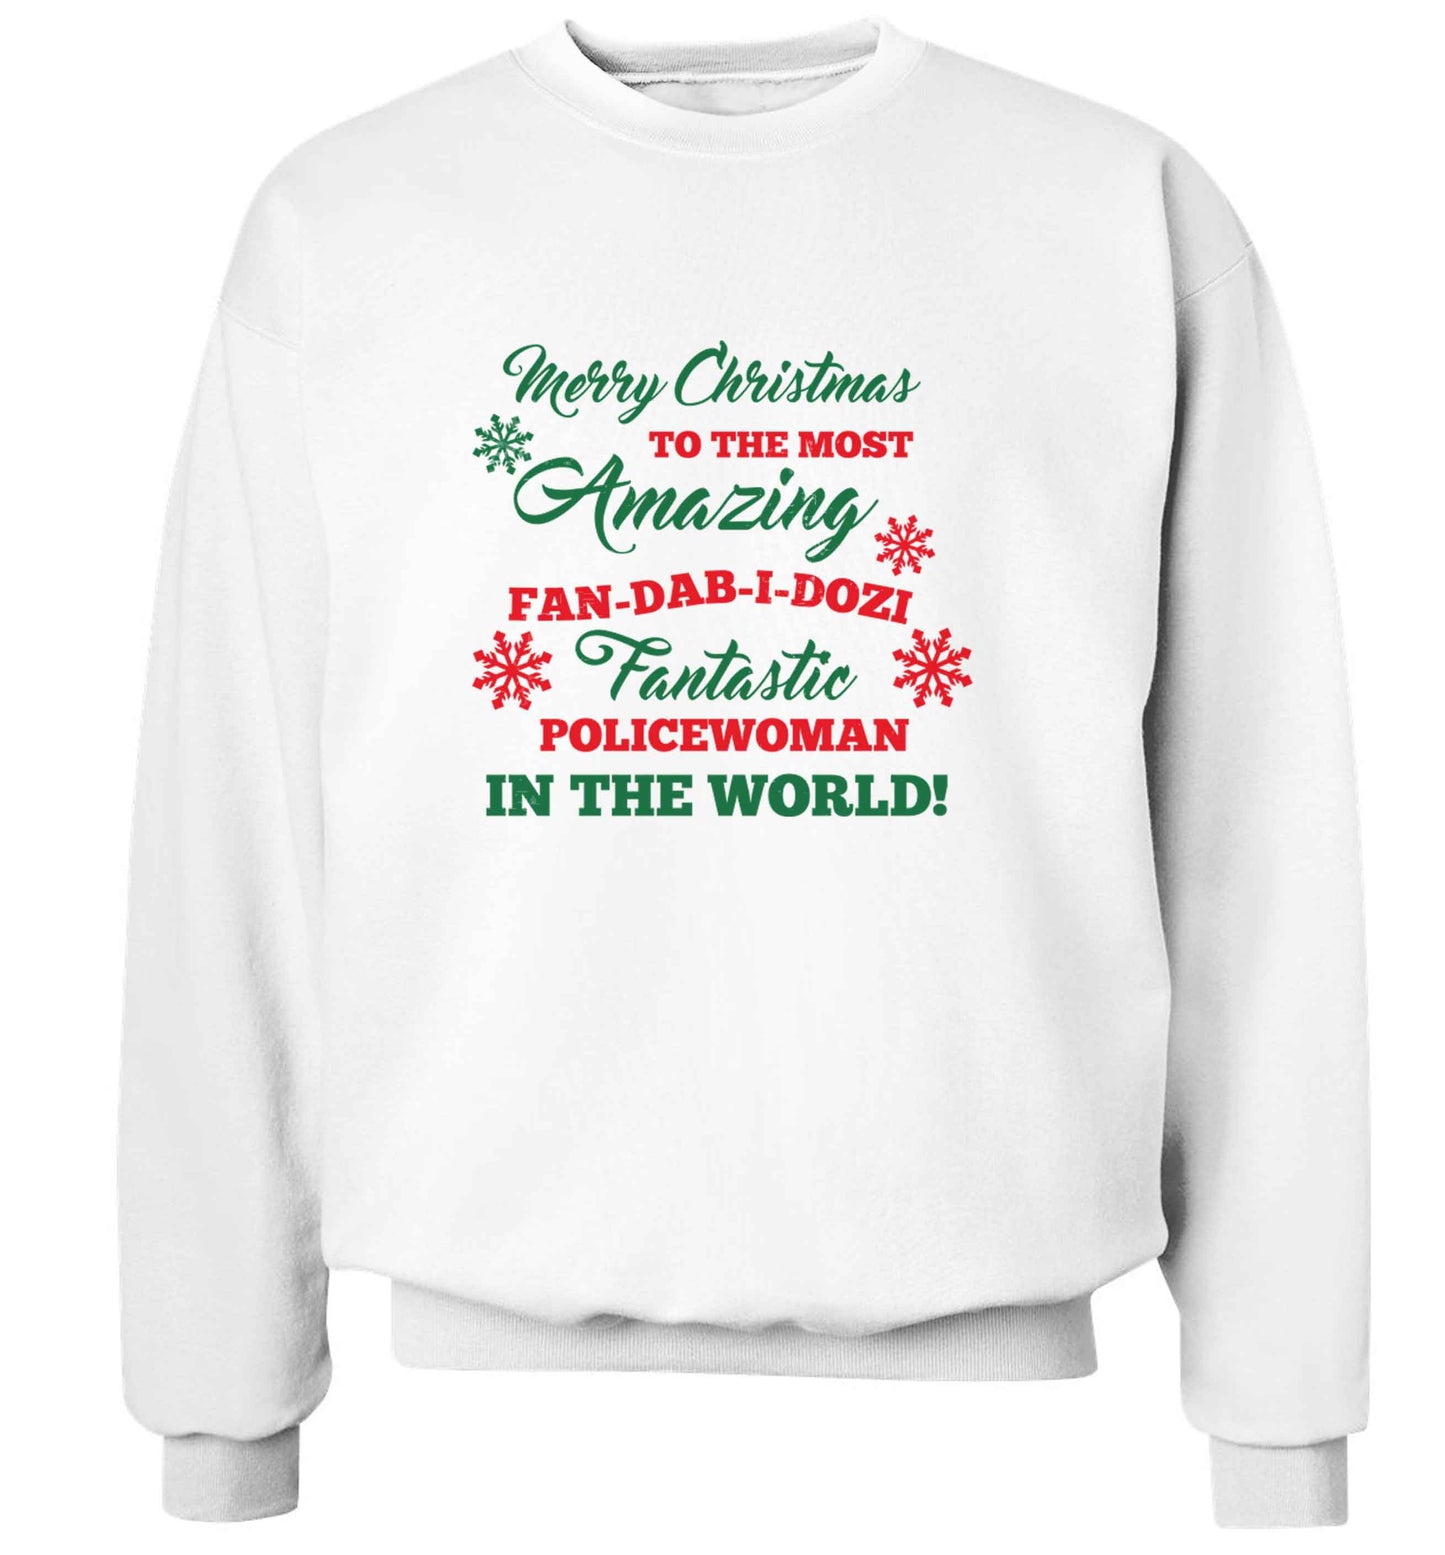 Merry Christmas to the most amazing policewoman in the world! adult's unisex white sweater 2XL